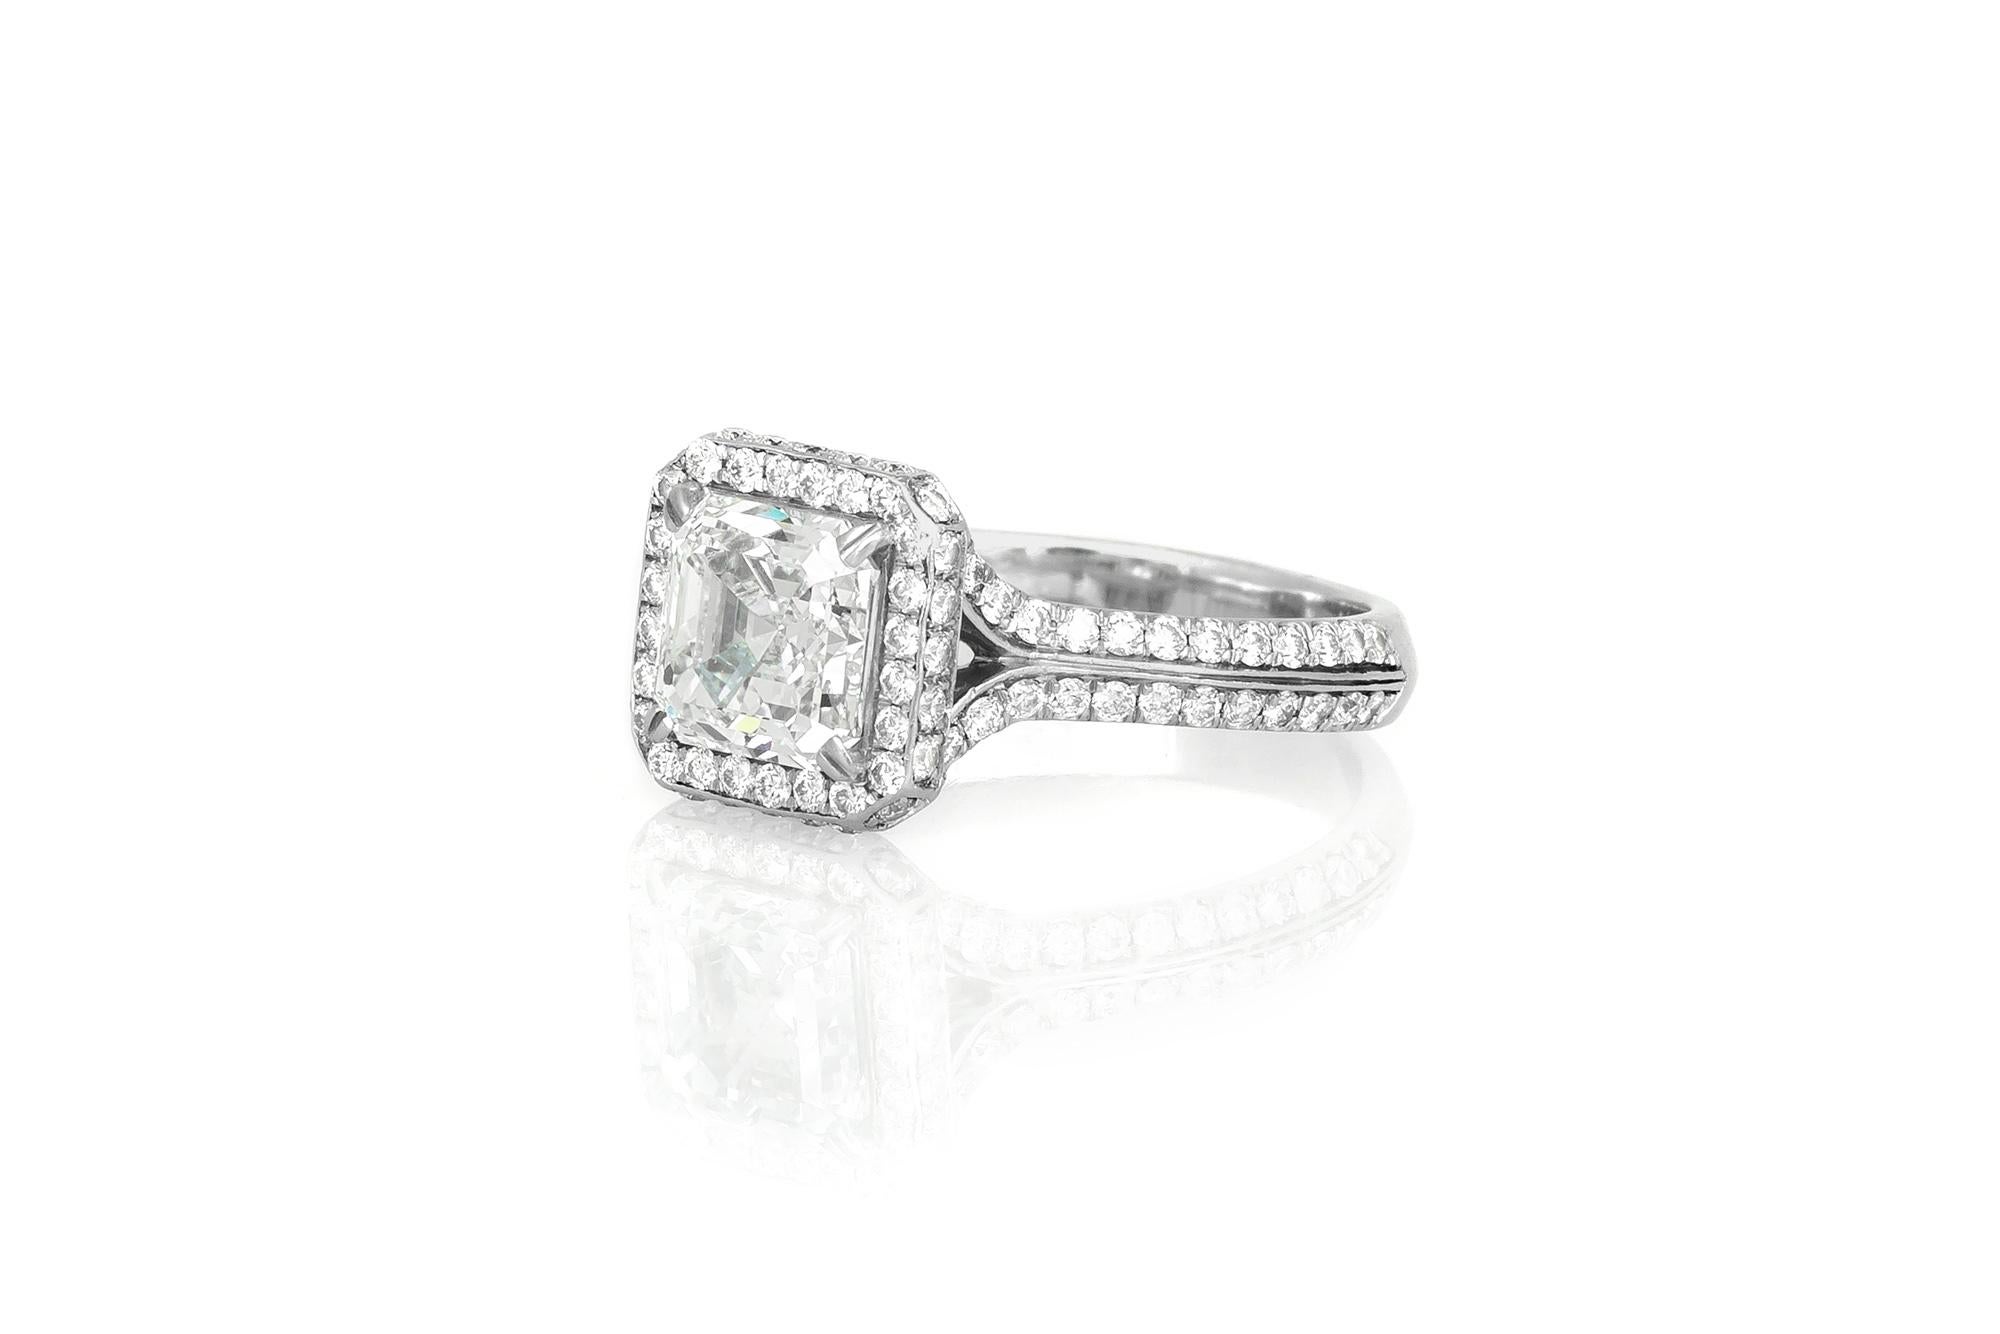 Finely crafted in platinum, with a center GIA certified Square Emerald cut diamond, weighing 2.00 carats.
Color G Clarity VS2. 
The ring is accented with micro-pave brilliant cut diamonds.